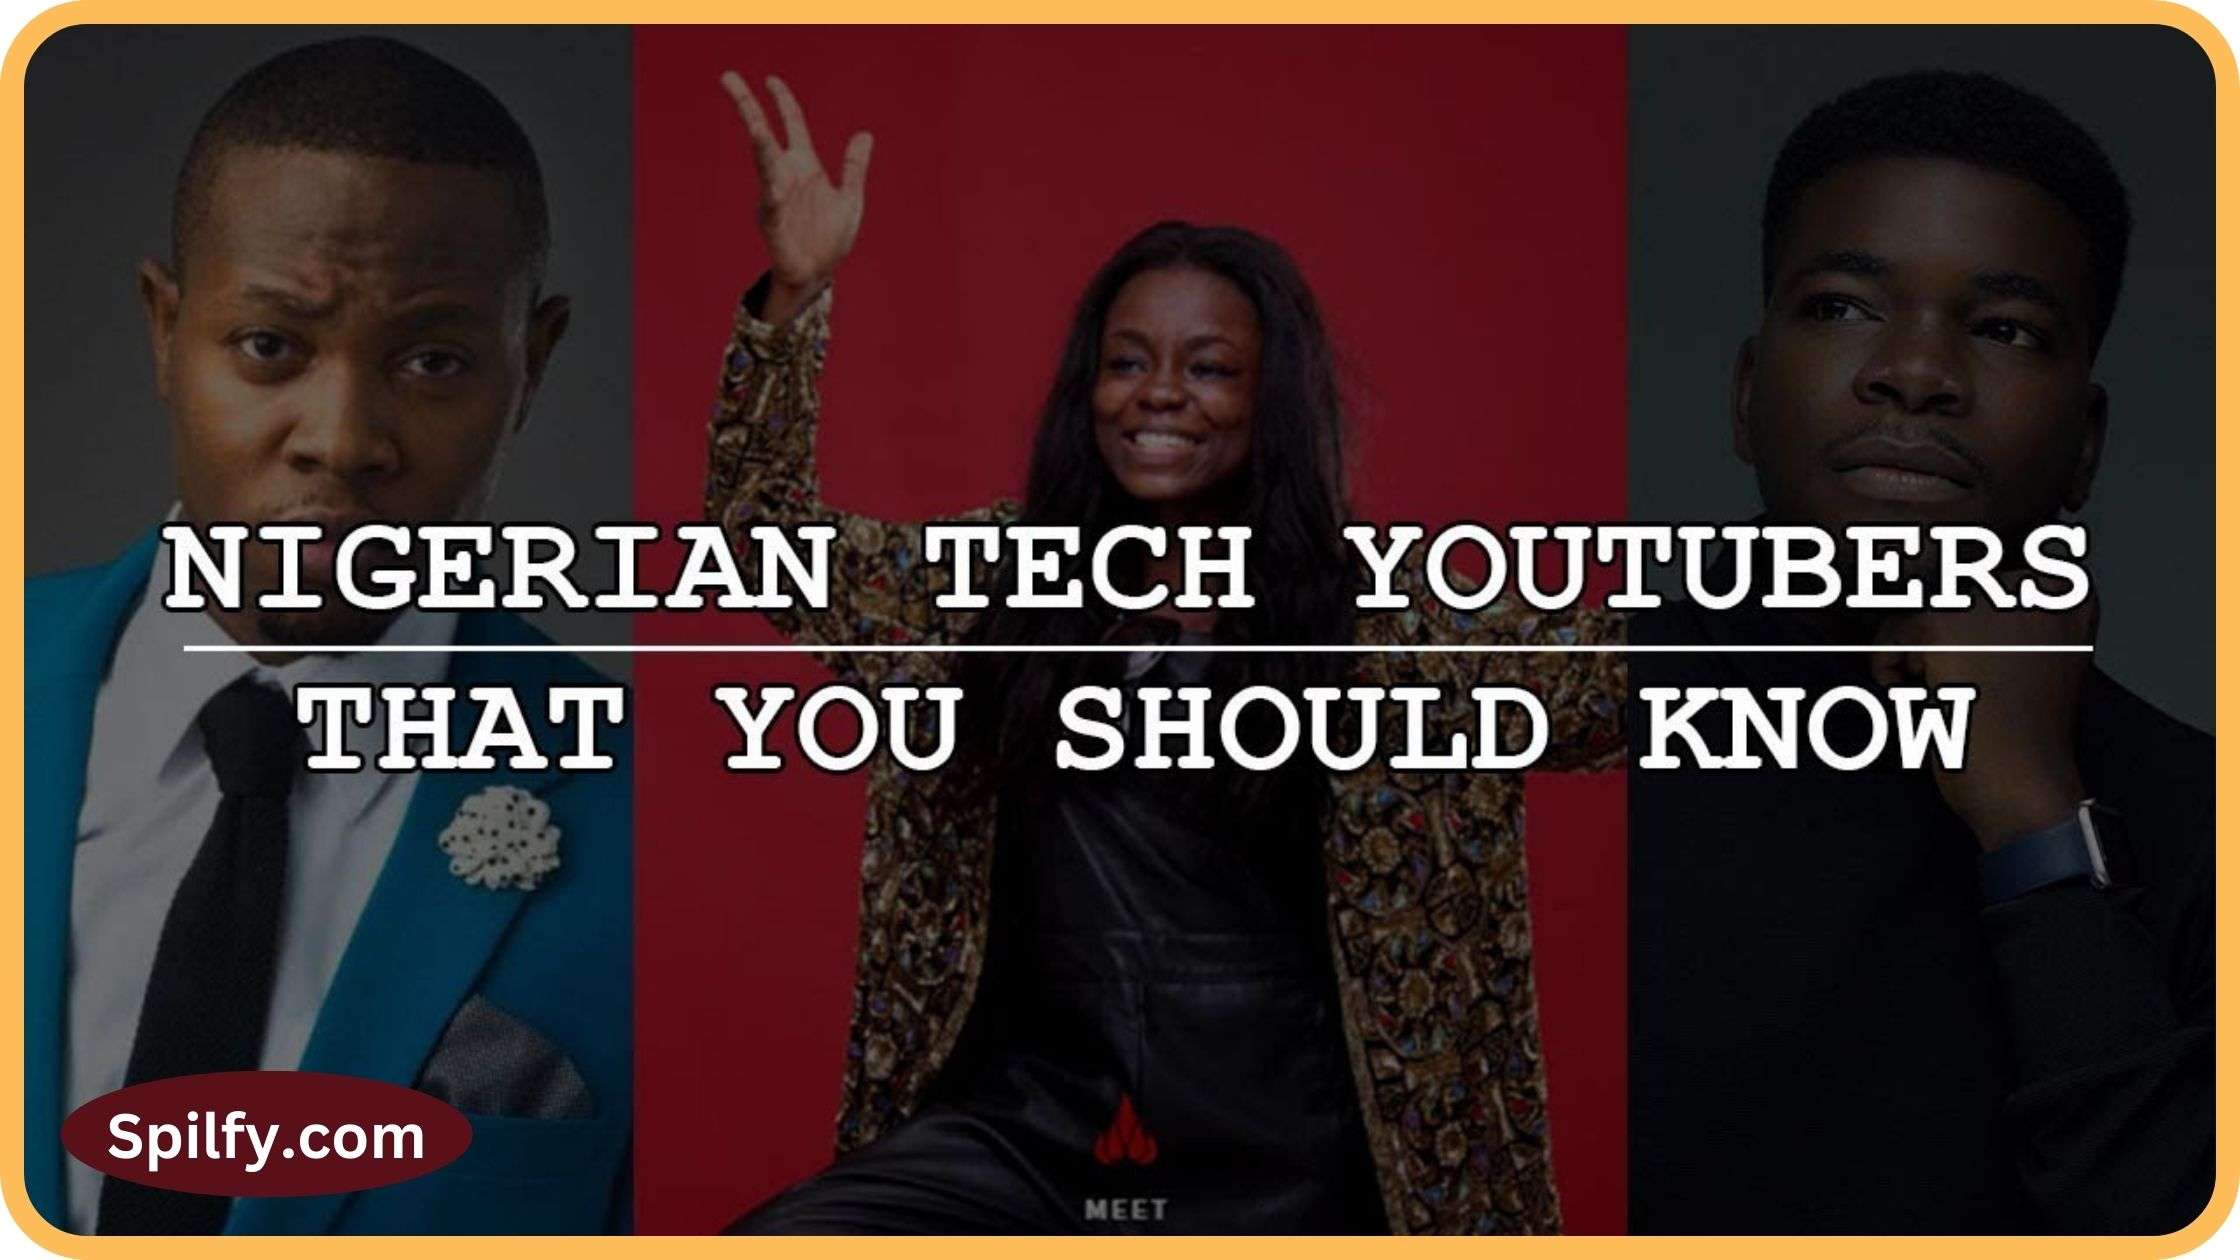 Top Nigerian Tech YouTubers and channels